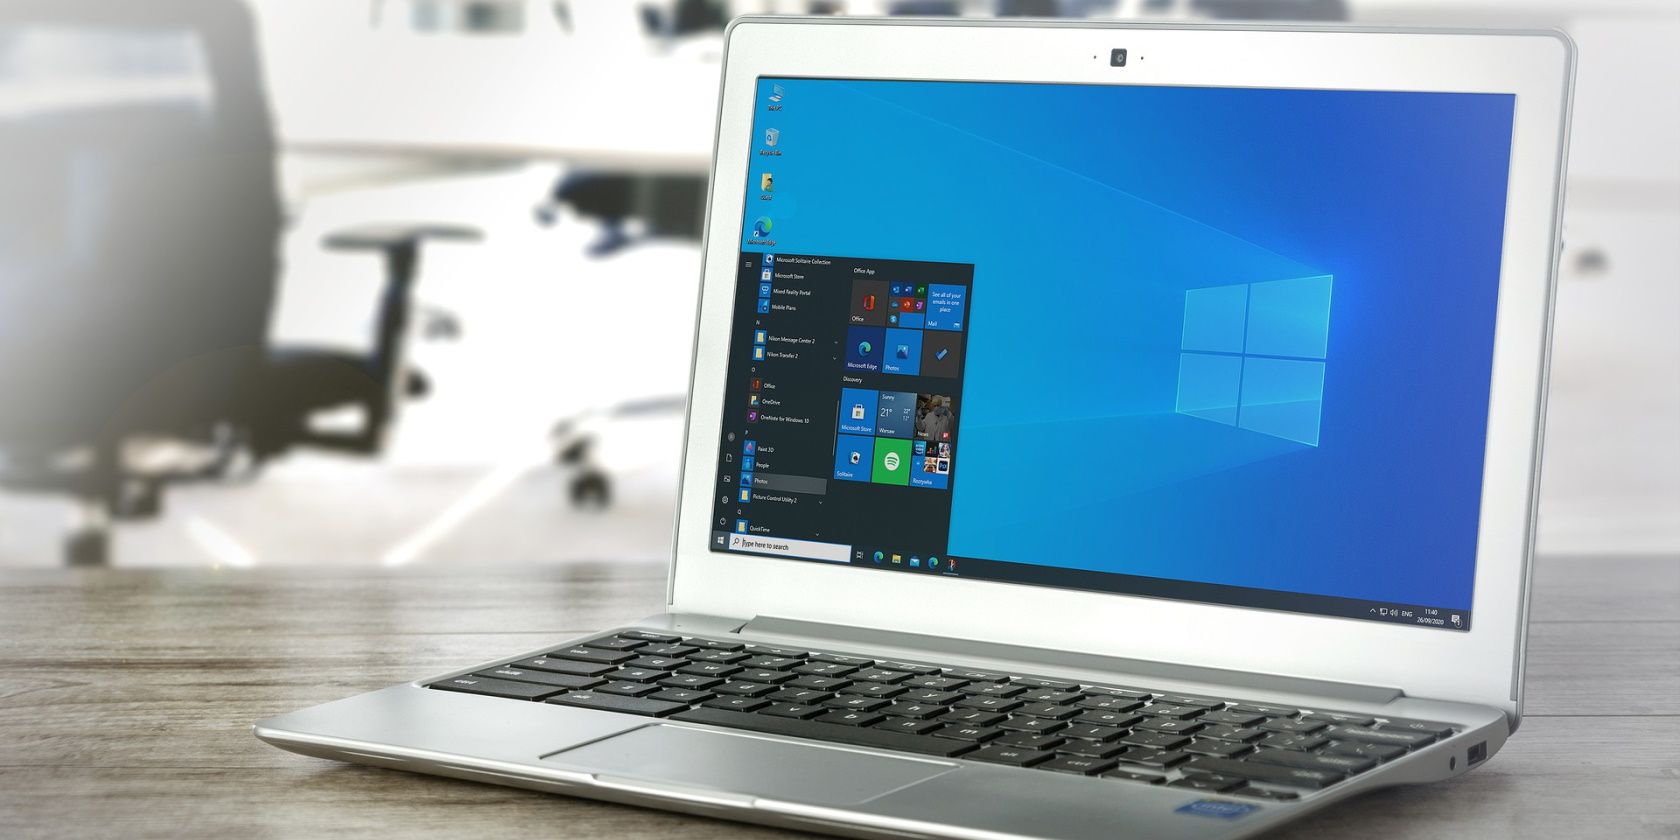 How to Fix Windows 10 When It Automatically Compresses Files